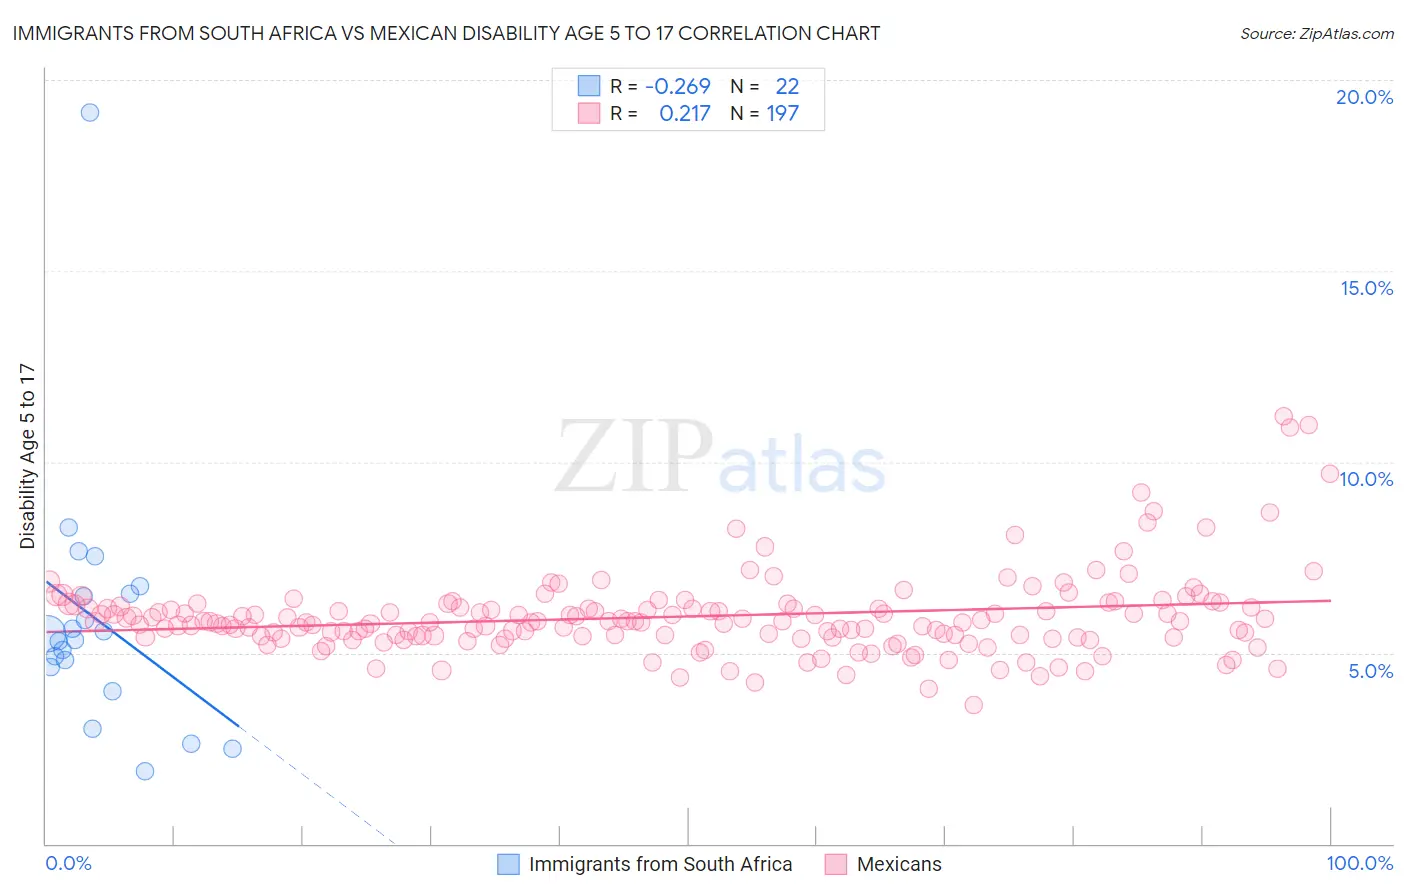 Immigrants from South Africa vs Mexican Disability Age 5 to 17